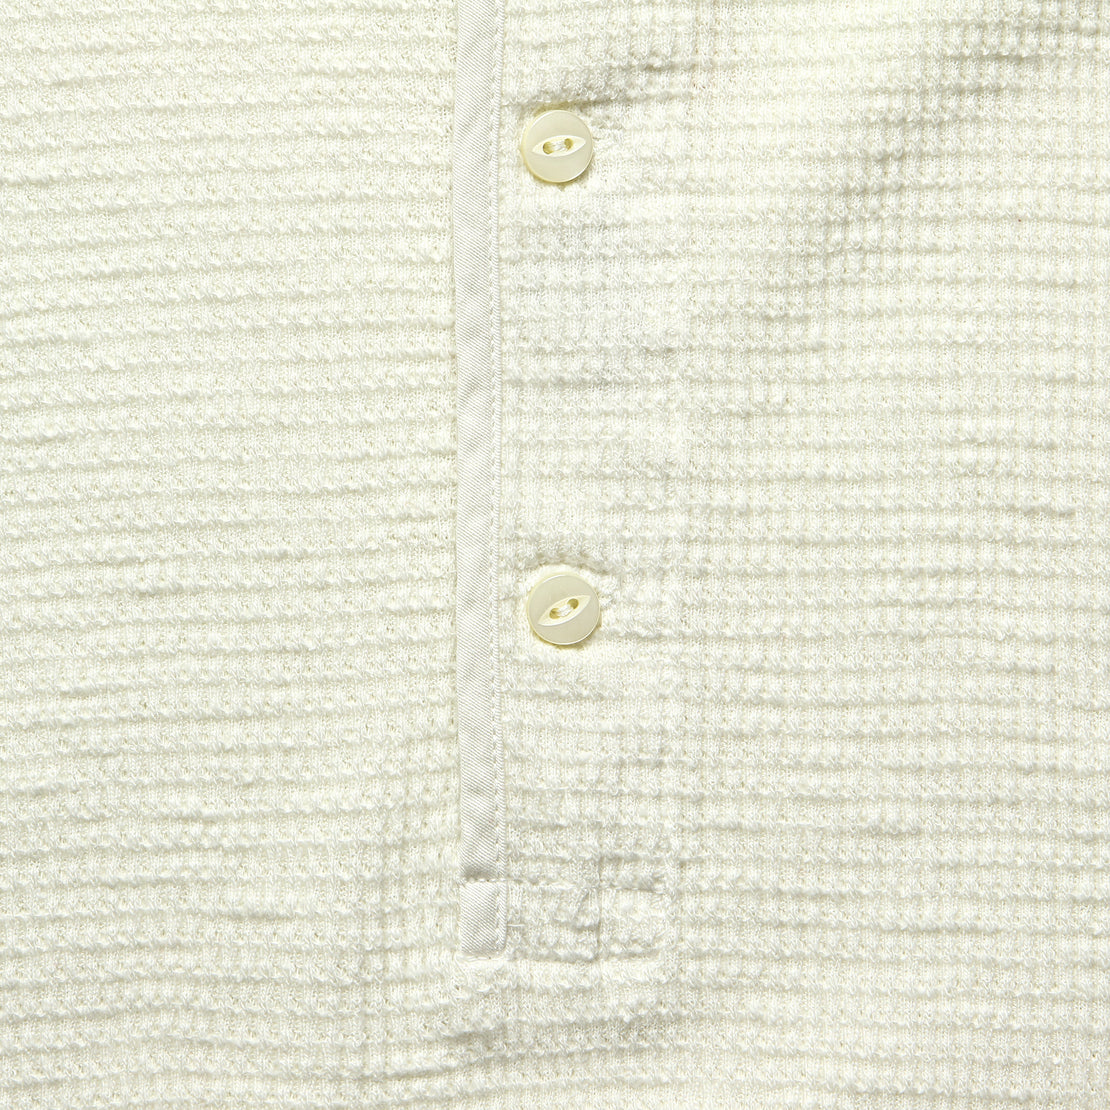 Waffle-Knit Henley - Paper White - RRL - STAG Provisions - Tops - L/S Knit